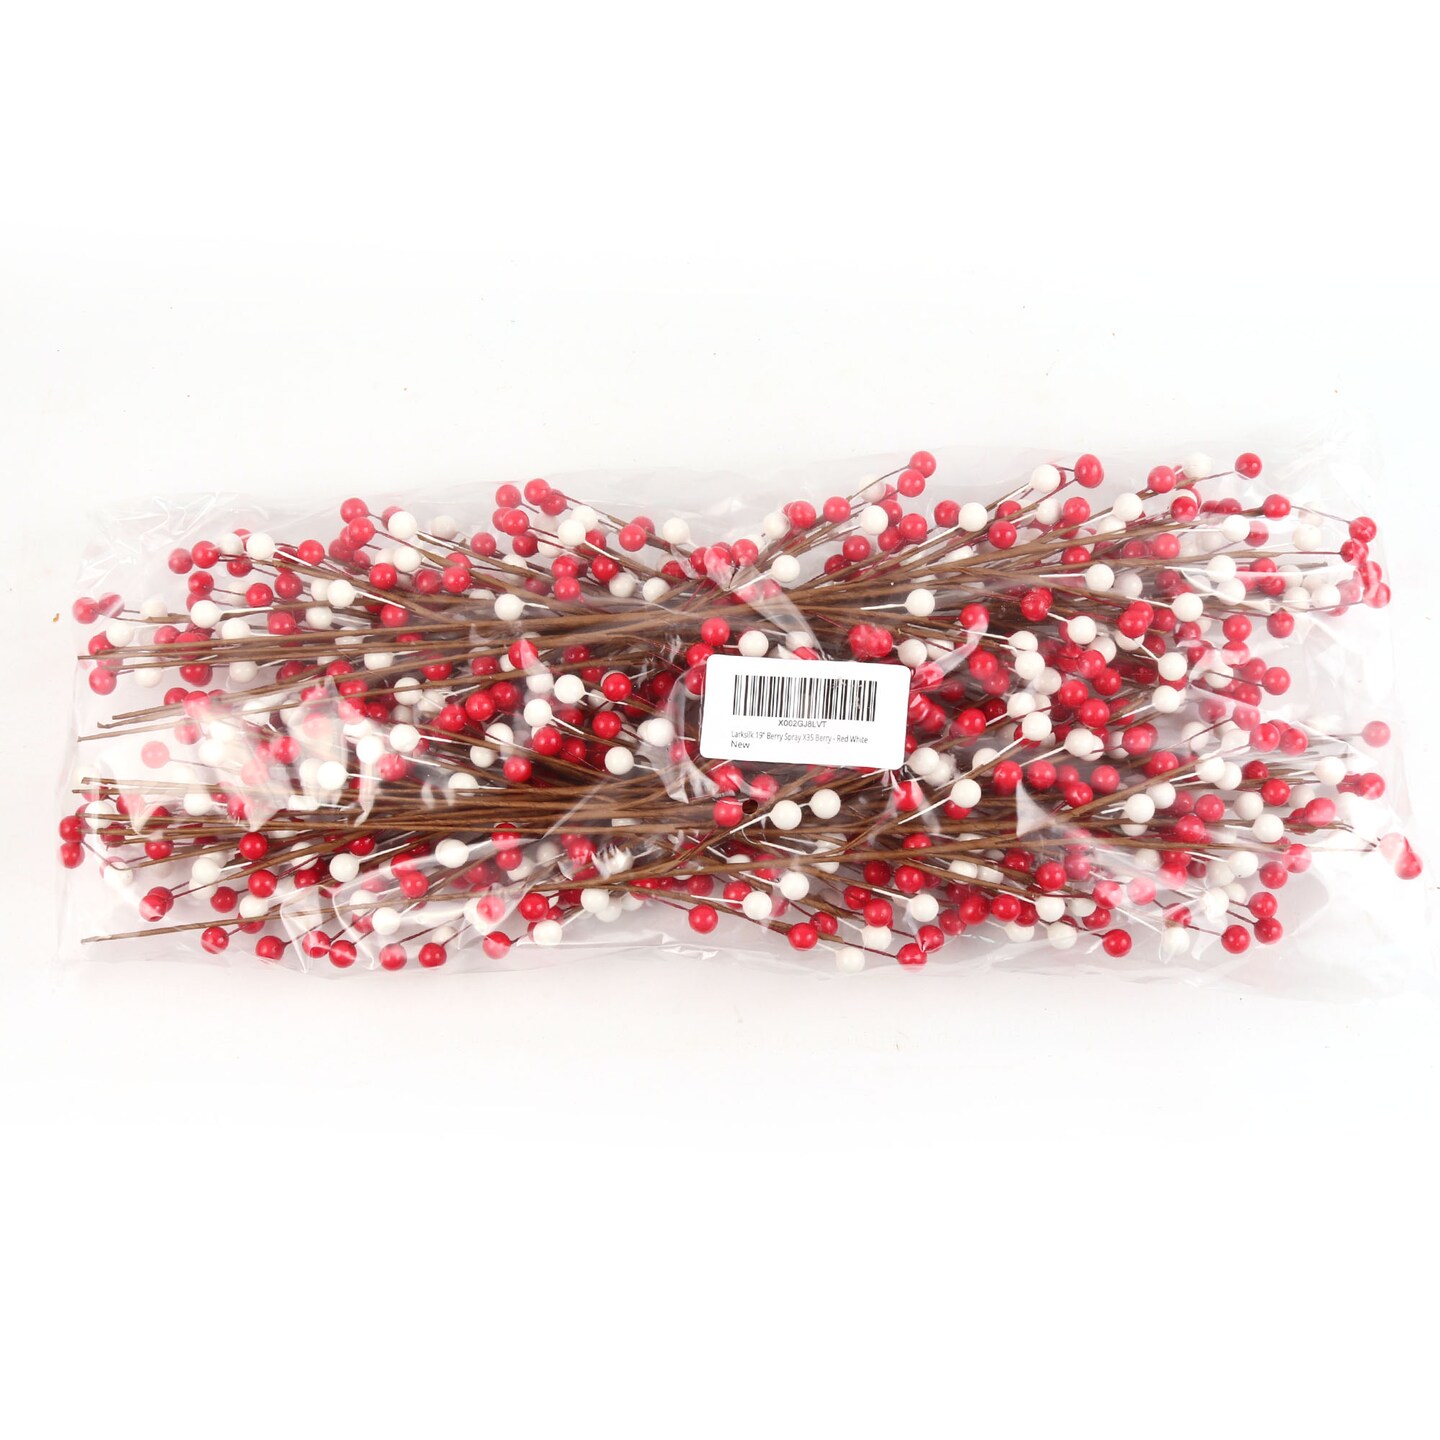 White Holly Berry Stems with 35 Lifelike Berries, 17-Inch, Holiday Xmas  Picks, Trees, Wreaths, & Garlands, Christmas Berries, Home & Office  Decor (Set of 12)